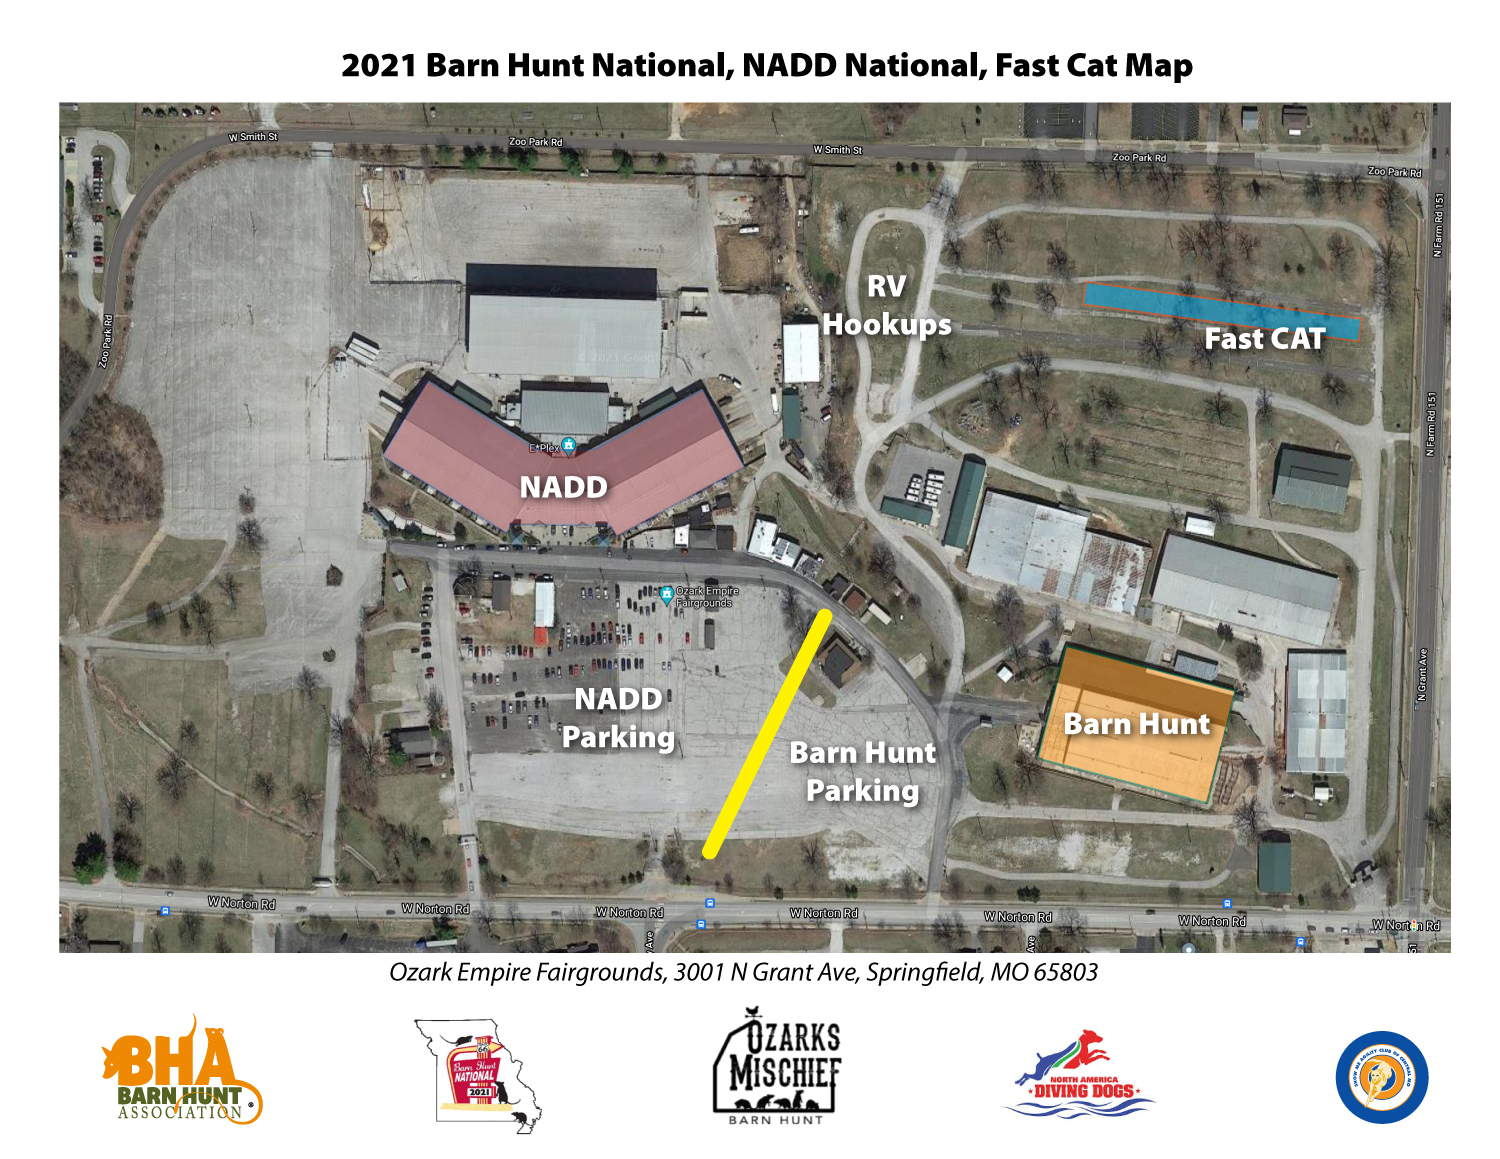 Map showing locations of Barn Hunt, NADD, Fast CAT
